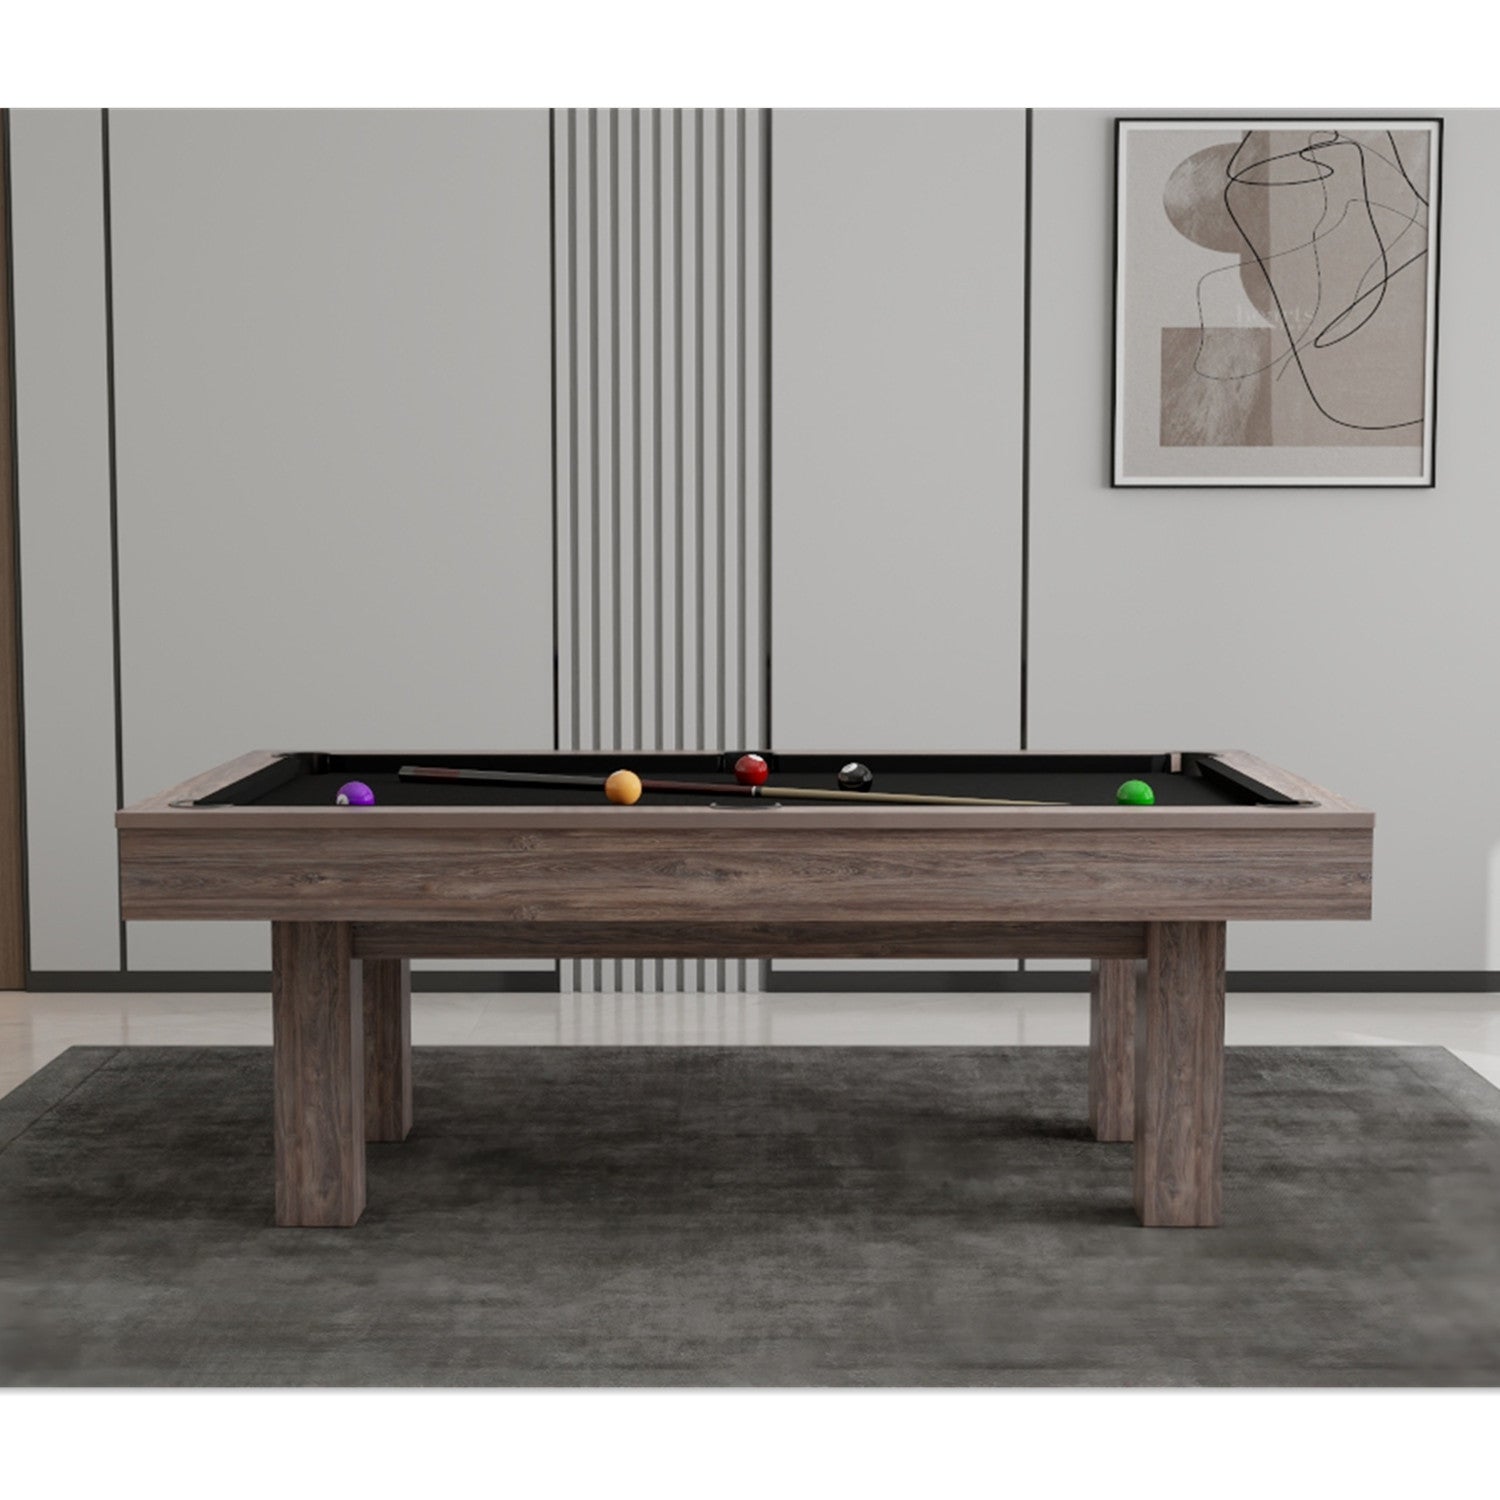 Sidra Dining Pool Table - Slate 3IN1 8FT